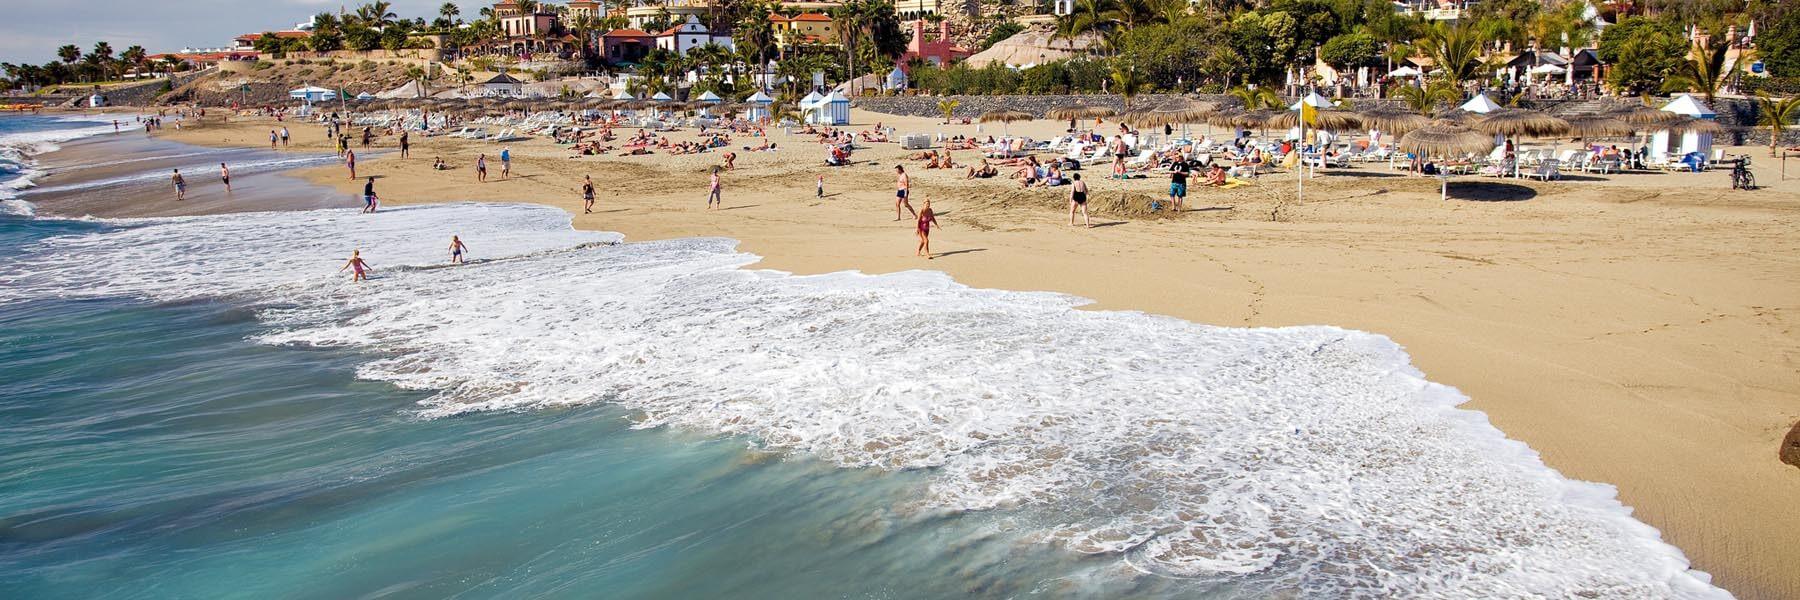 Playa del Duque - My favorite beach in Tenerife - Daily Travel Pill